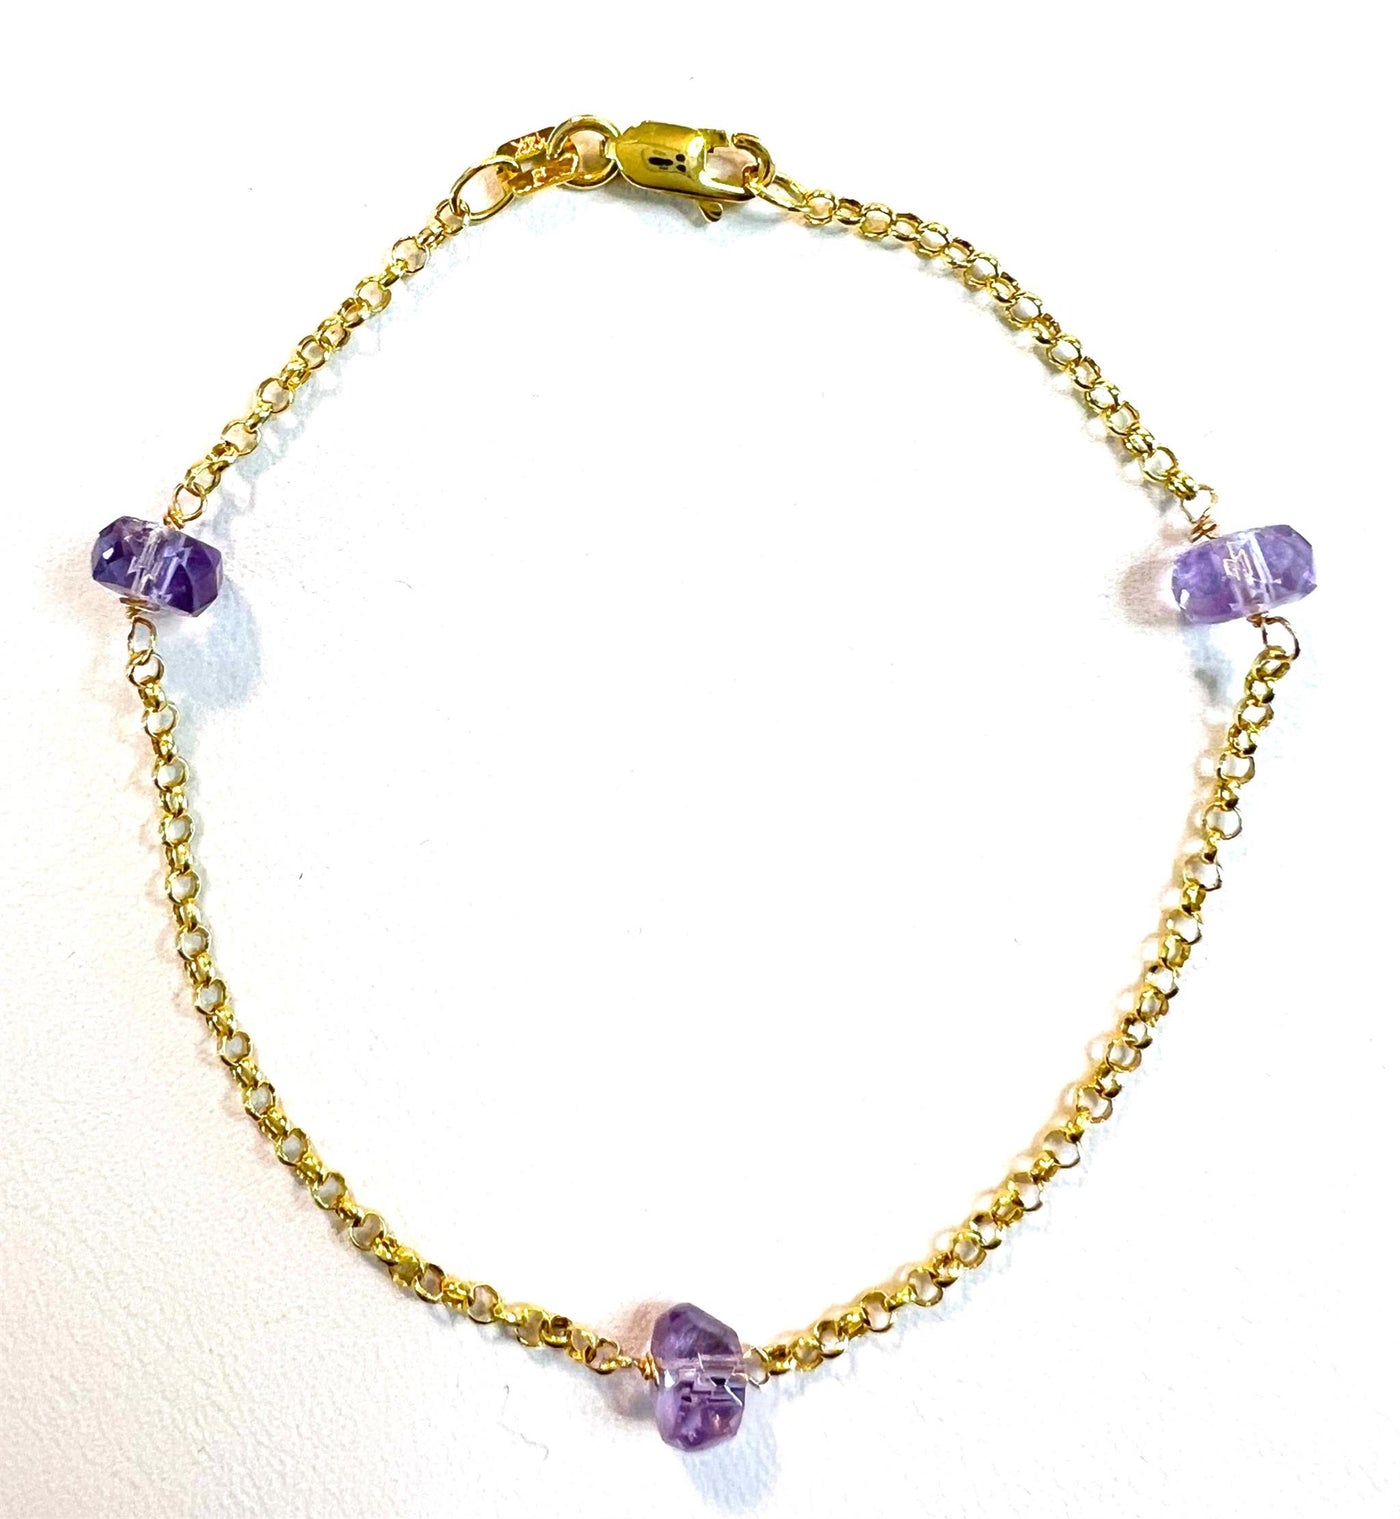 14K Yellow Gold 7" Station Style Bracelet Featuring Amethysts